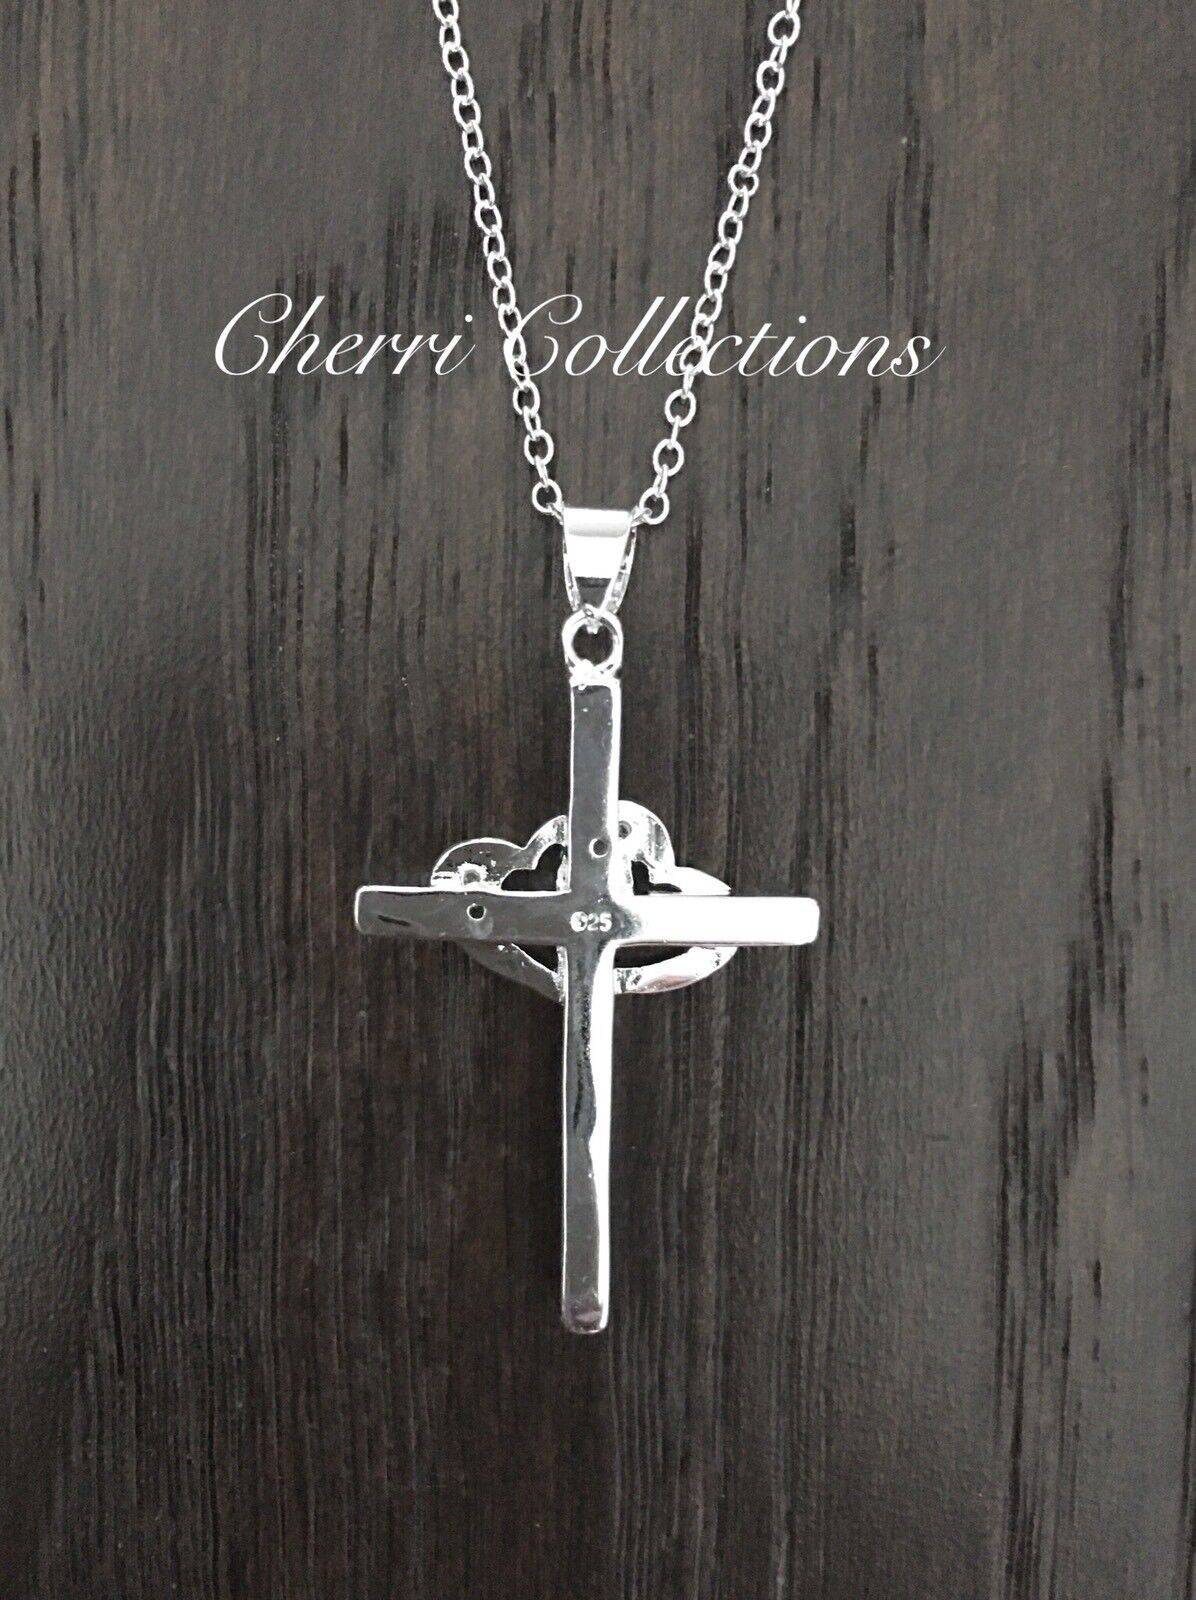 A sterling silver cross necklace on a wooden table.